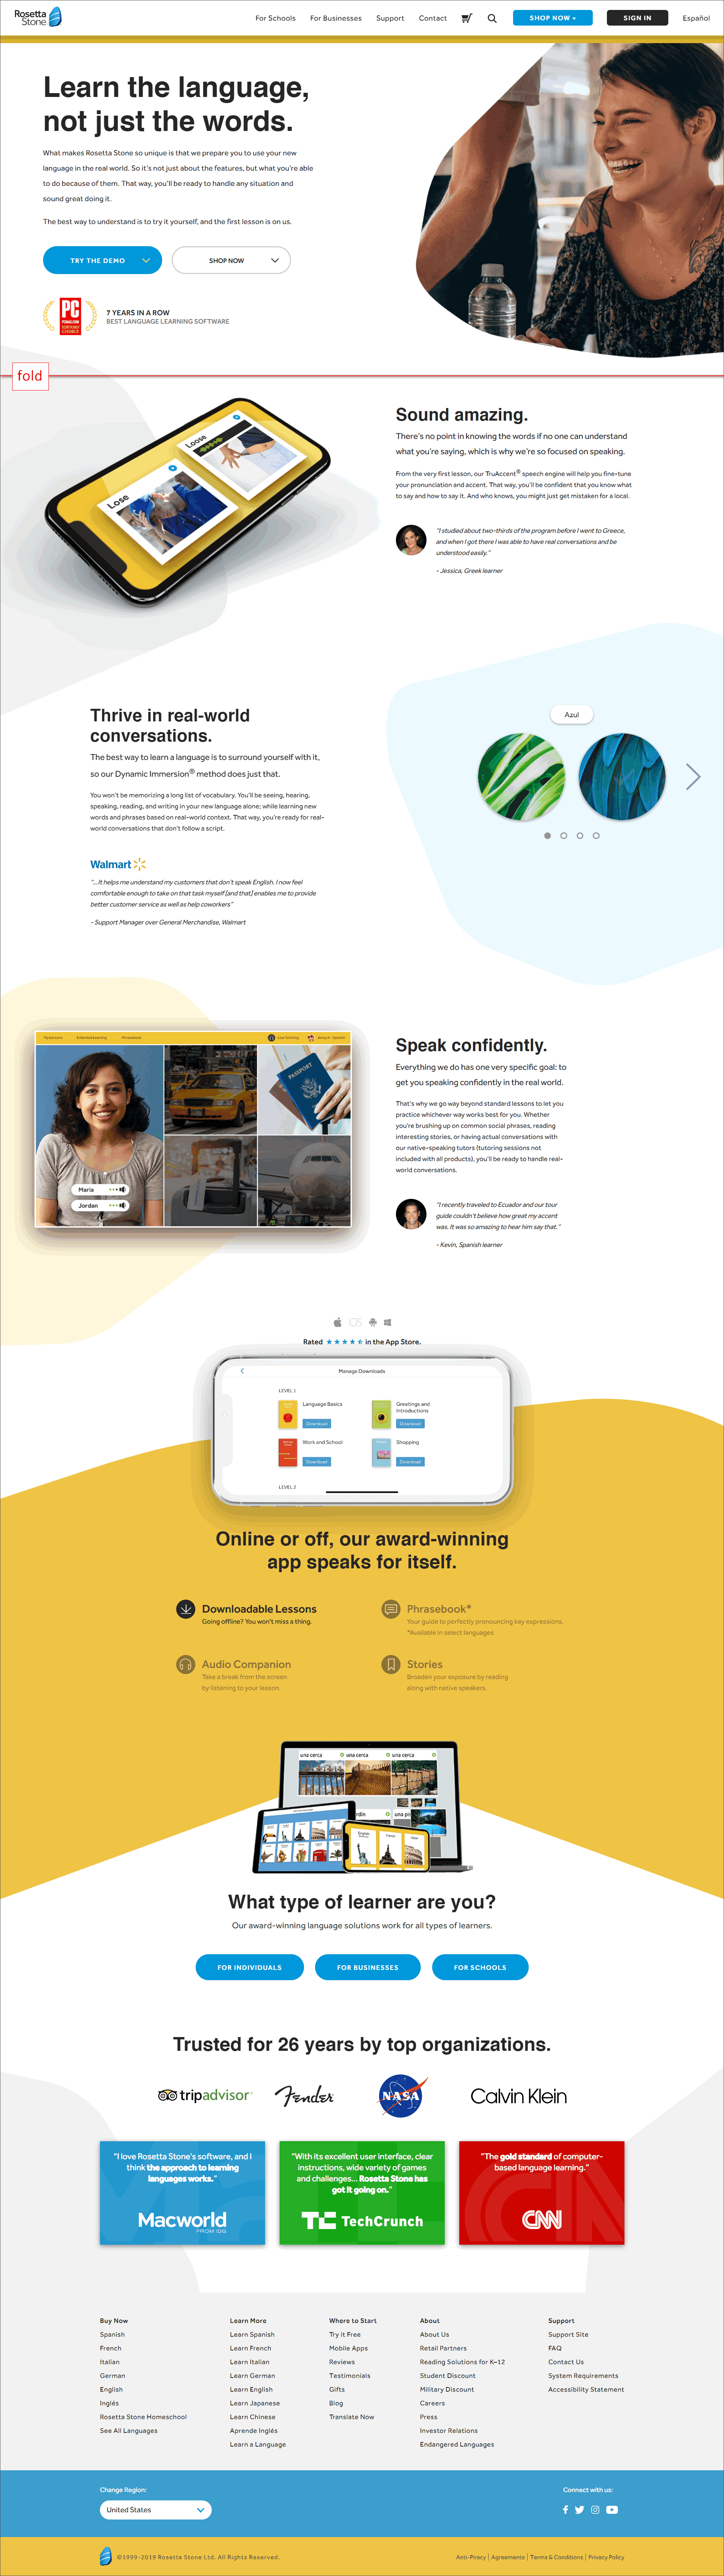 RosettaStone.com: Example of good homepage design - clear USP, establishes authority, caters to top to mid of the funnel visitors, visible benefit statements 